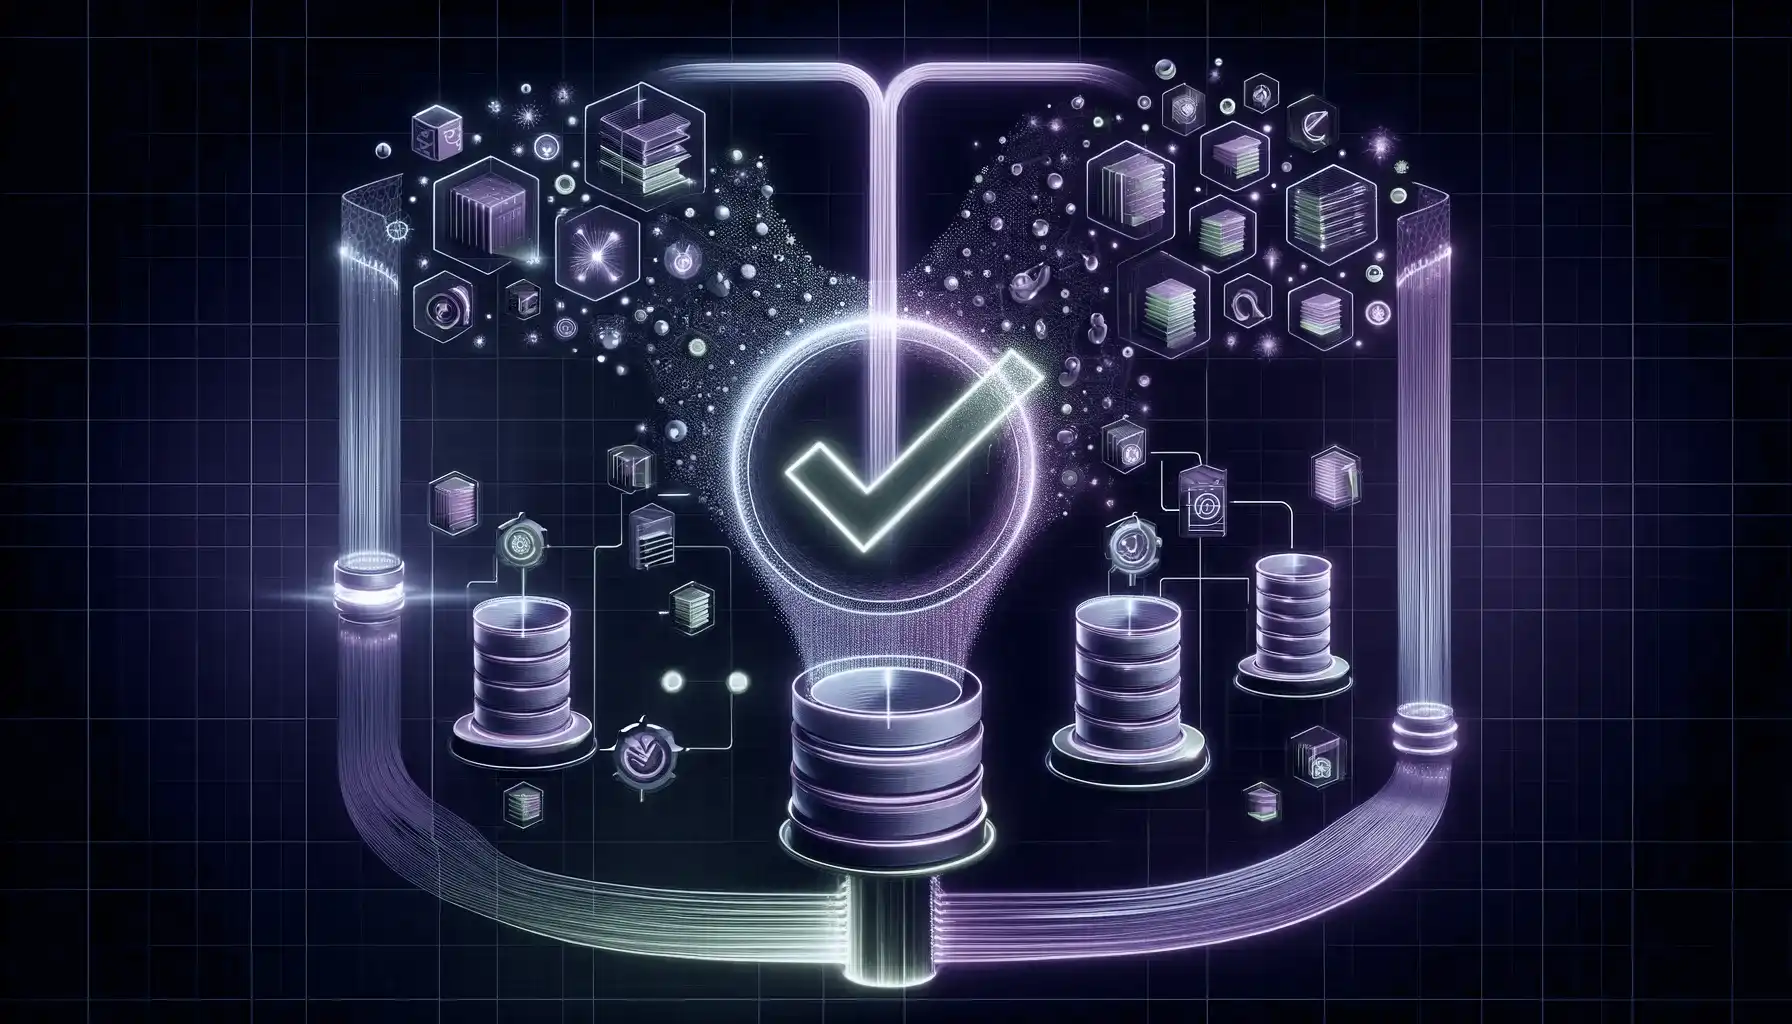 This 16x9 image vividly illustrates the role of machine learning in enhancing data quality and streamlining database analysis. It features dynamic purple and green neon data streams, representing the automated process of cleaning and transforming databases through machine learning algorithms. A prominent neon check mark symbol is integrated into the design, signifying the achievement of high-quality, accurately analyzed data. The streams interact with visual representations of databases, depicting the transformation and refinement of data. The imagery conveys the efficiency and precision that machine learning brings to database management, highlighting its importance in optimizing data for better business insights and decision-making. The overall design has a futuristic feel, emphasizing the advanced capabilities of AI in data processing and analysis.